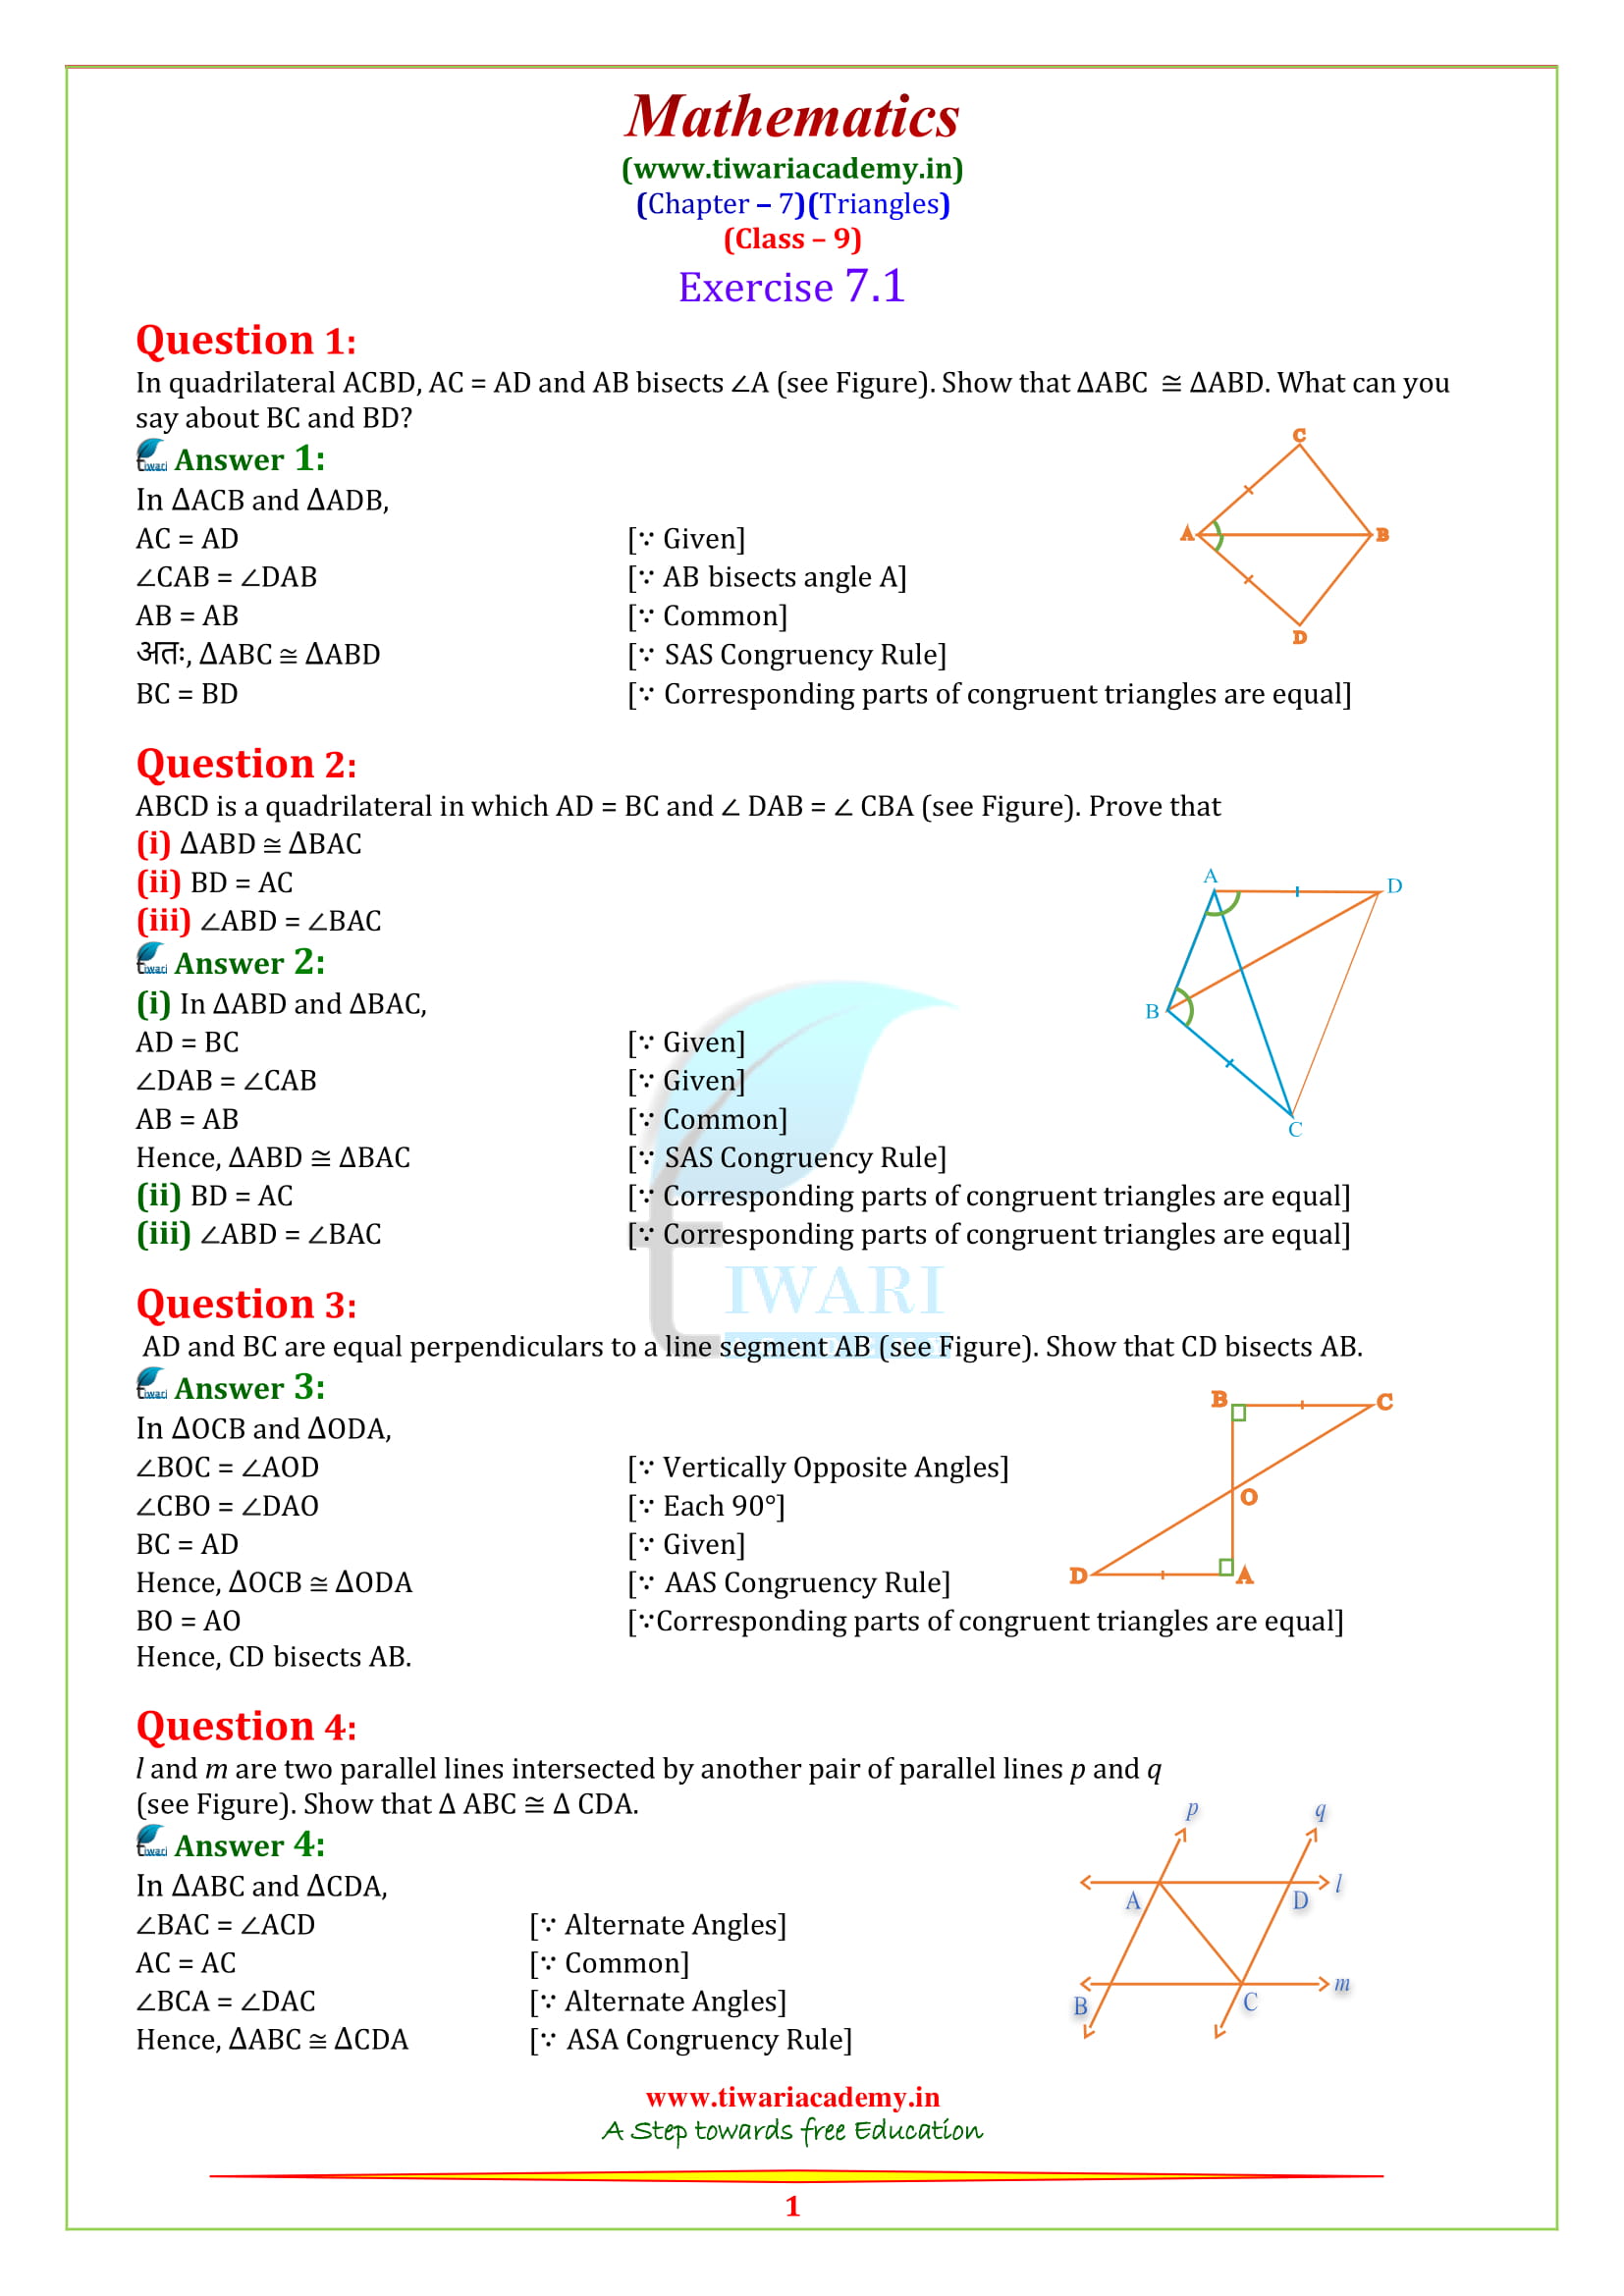 NCERT Solutions for class 9 Maths Chapter 7 Exercise 7.1